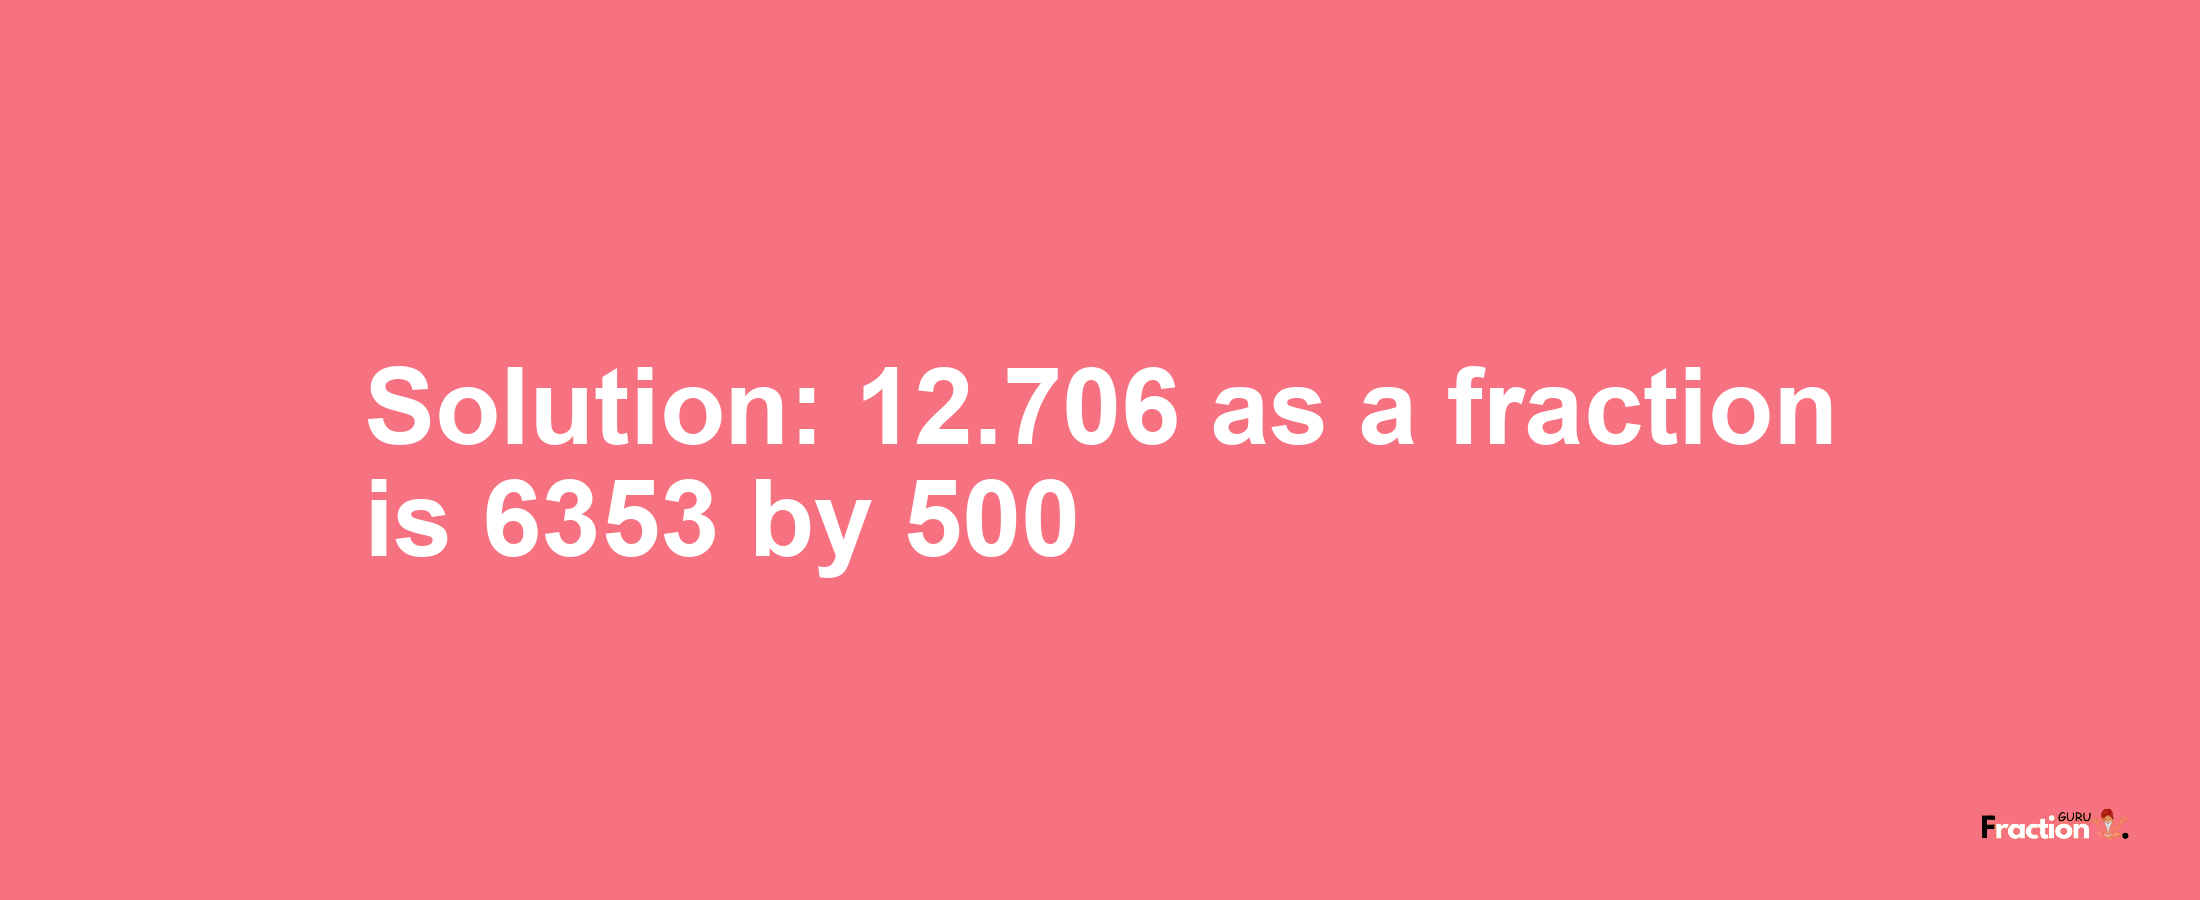 Solution:12.706 as a fraction is 6353/500